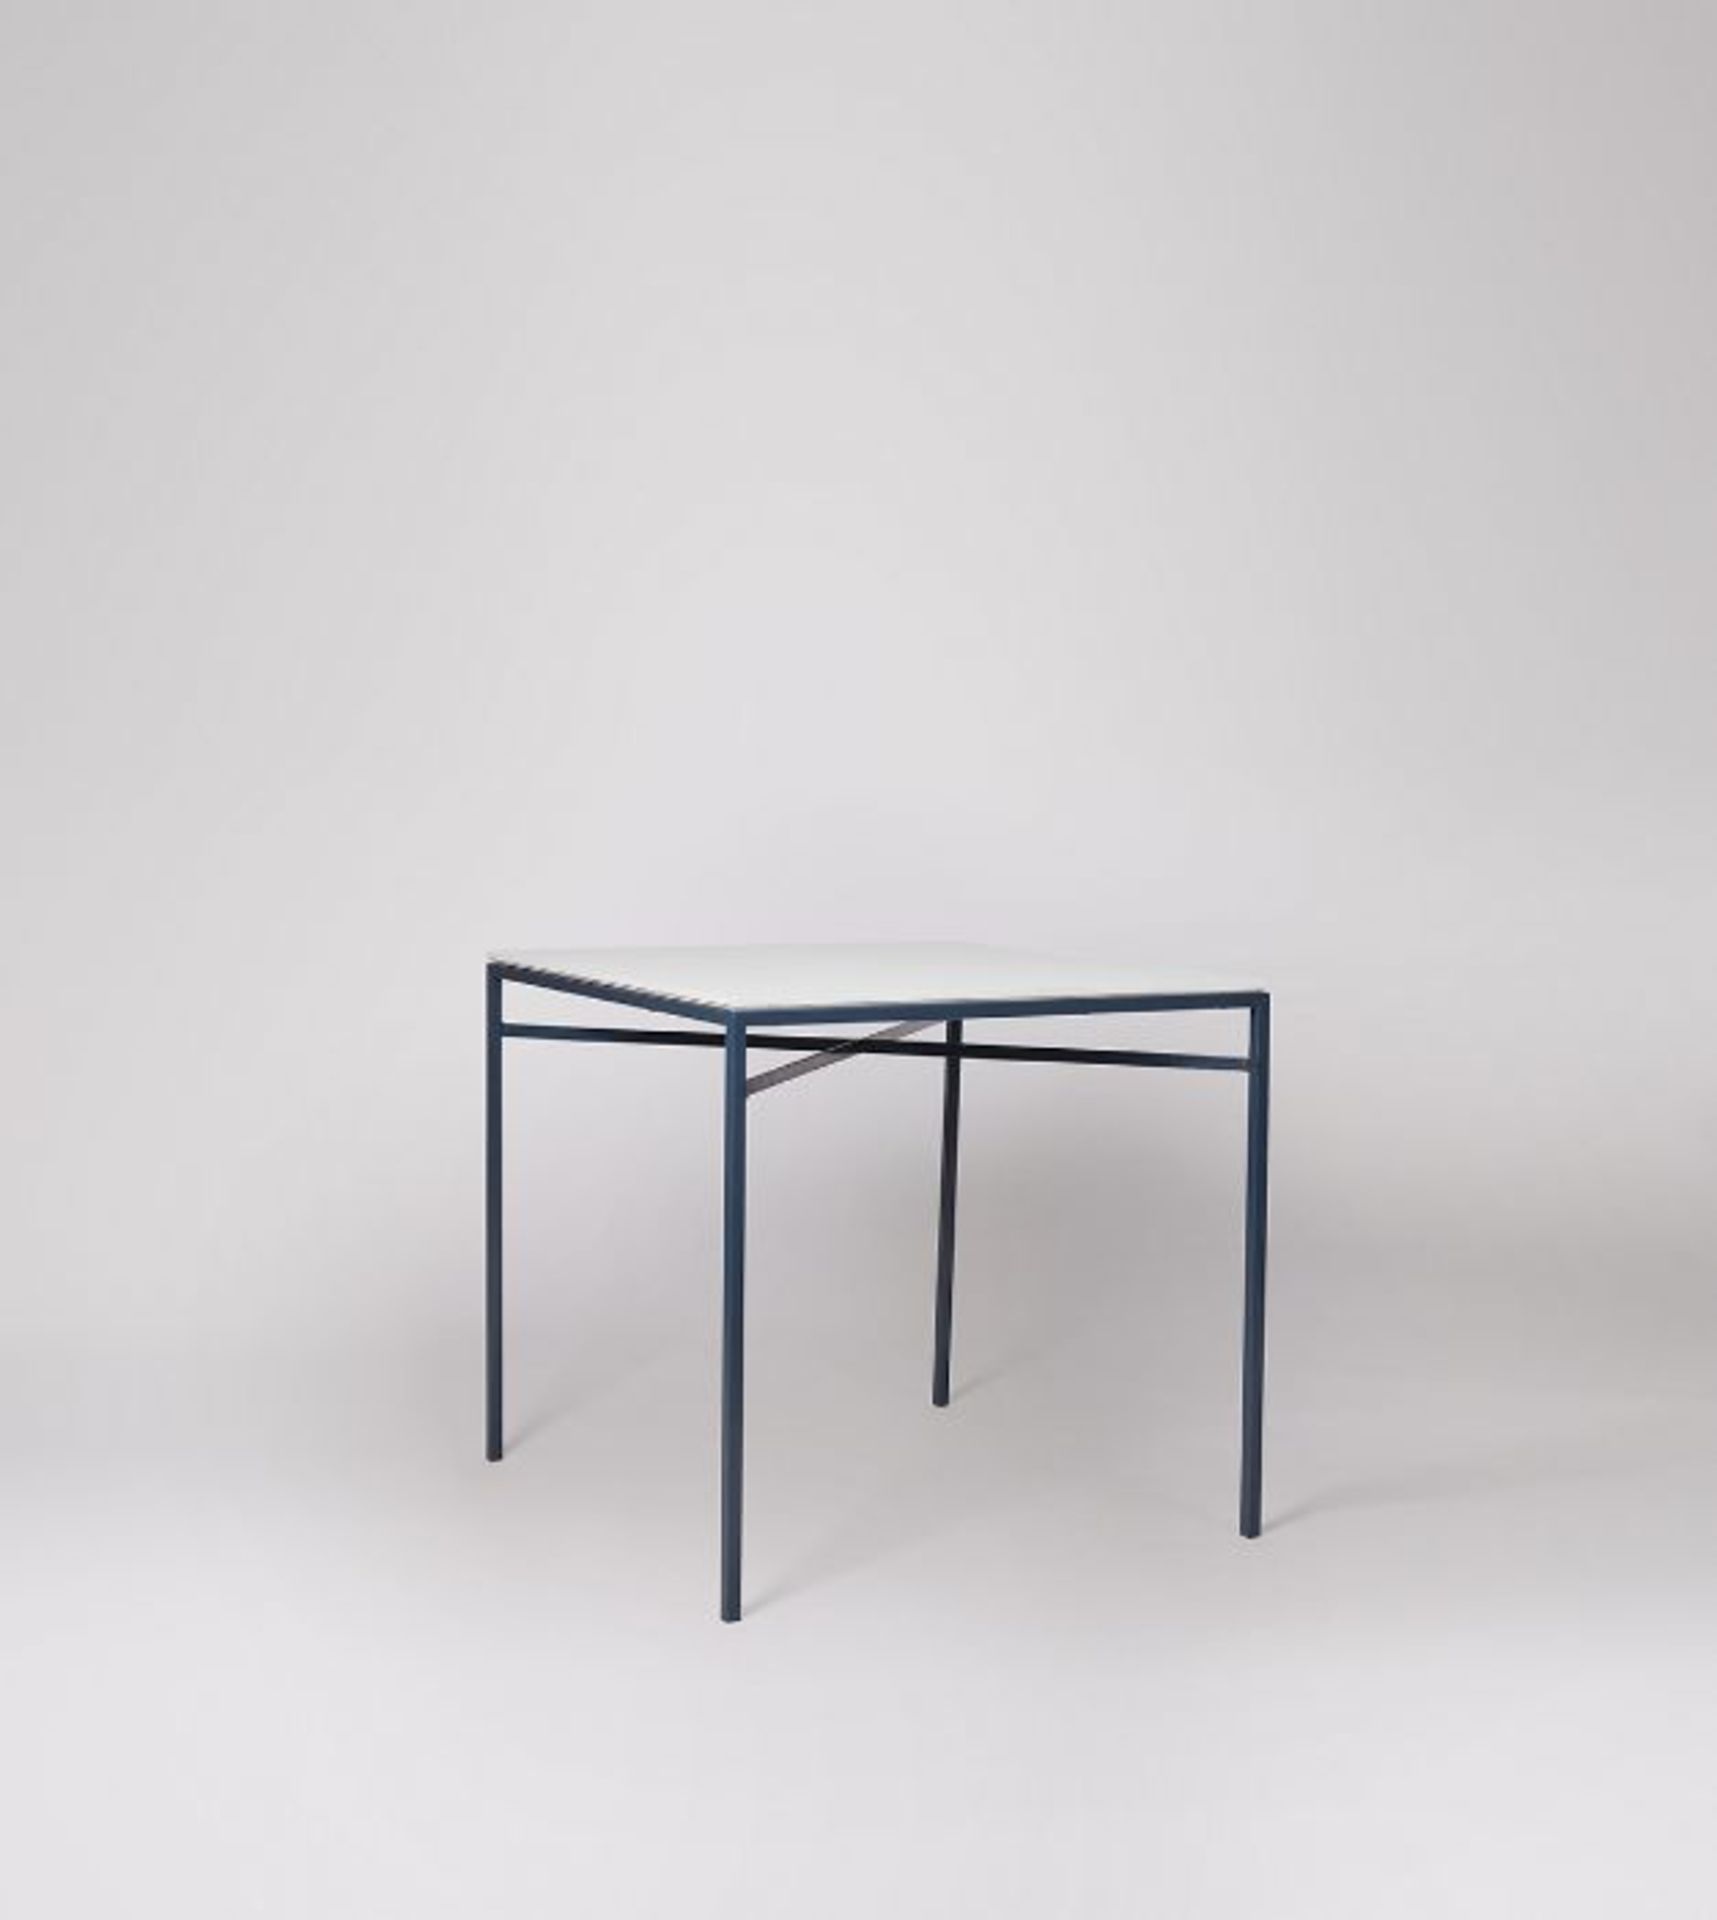 Swoon Docklands Dining Square Dining Table Navy and White RRP £199.00 - Grade B - Image 2 of 3